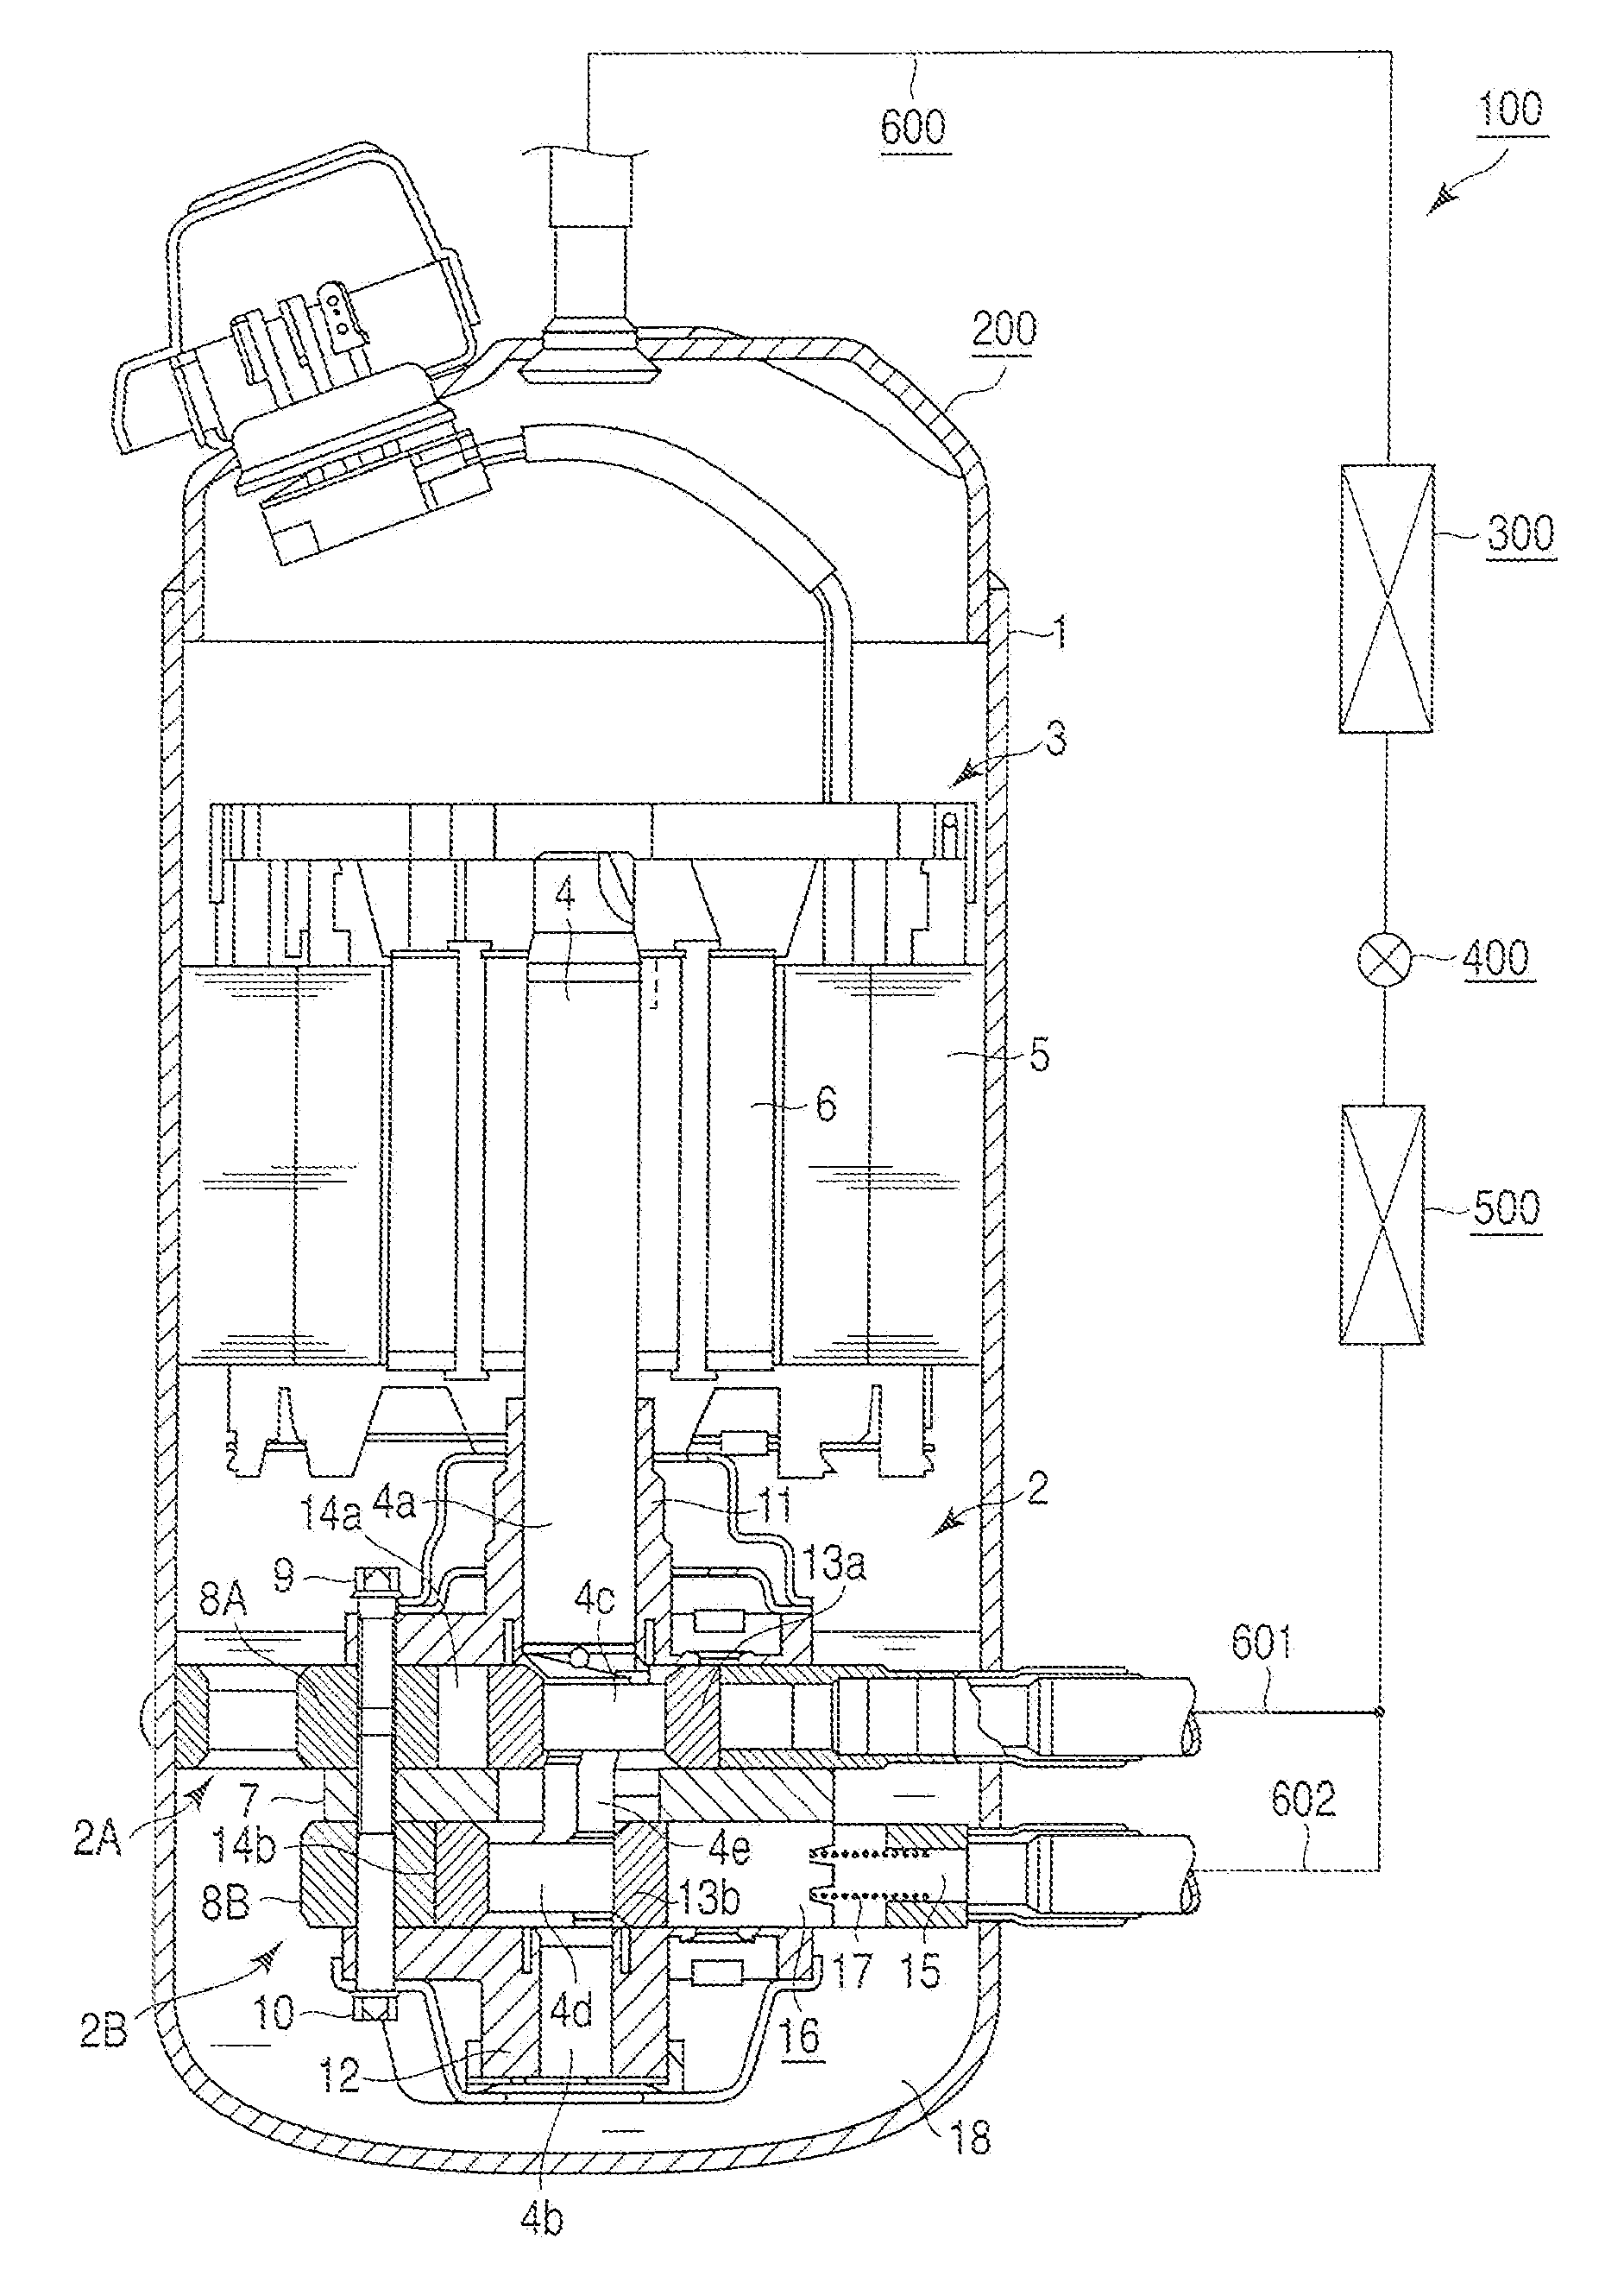 Multi-cylinder rotary compressor and refrigeration cycle equipment